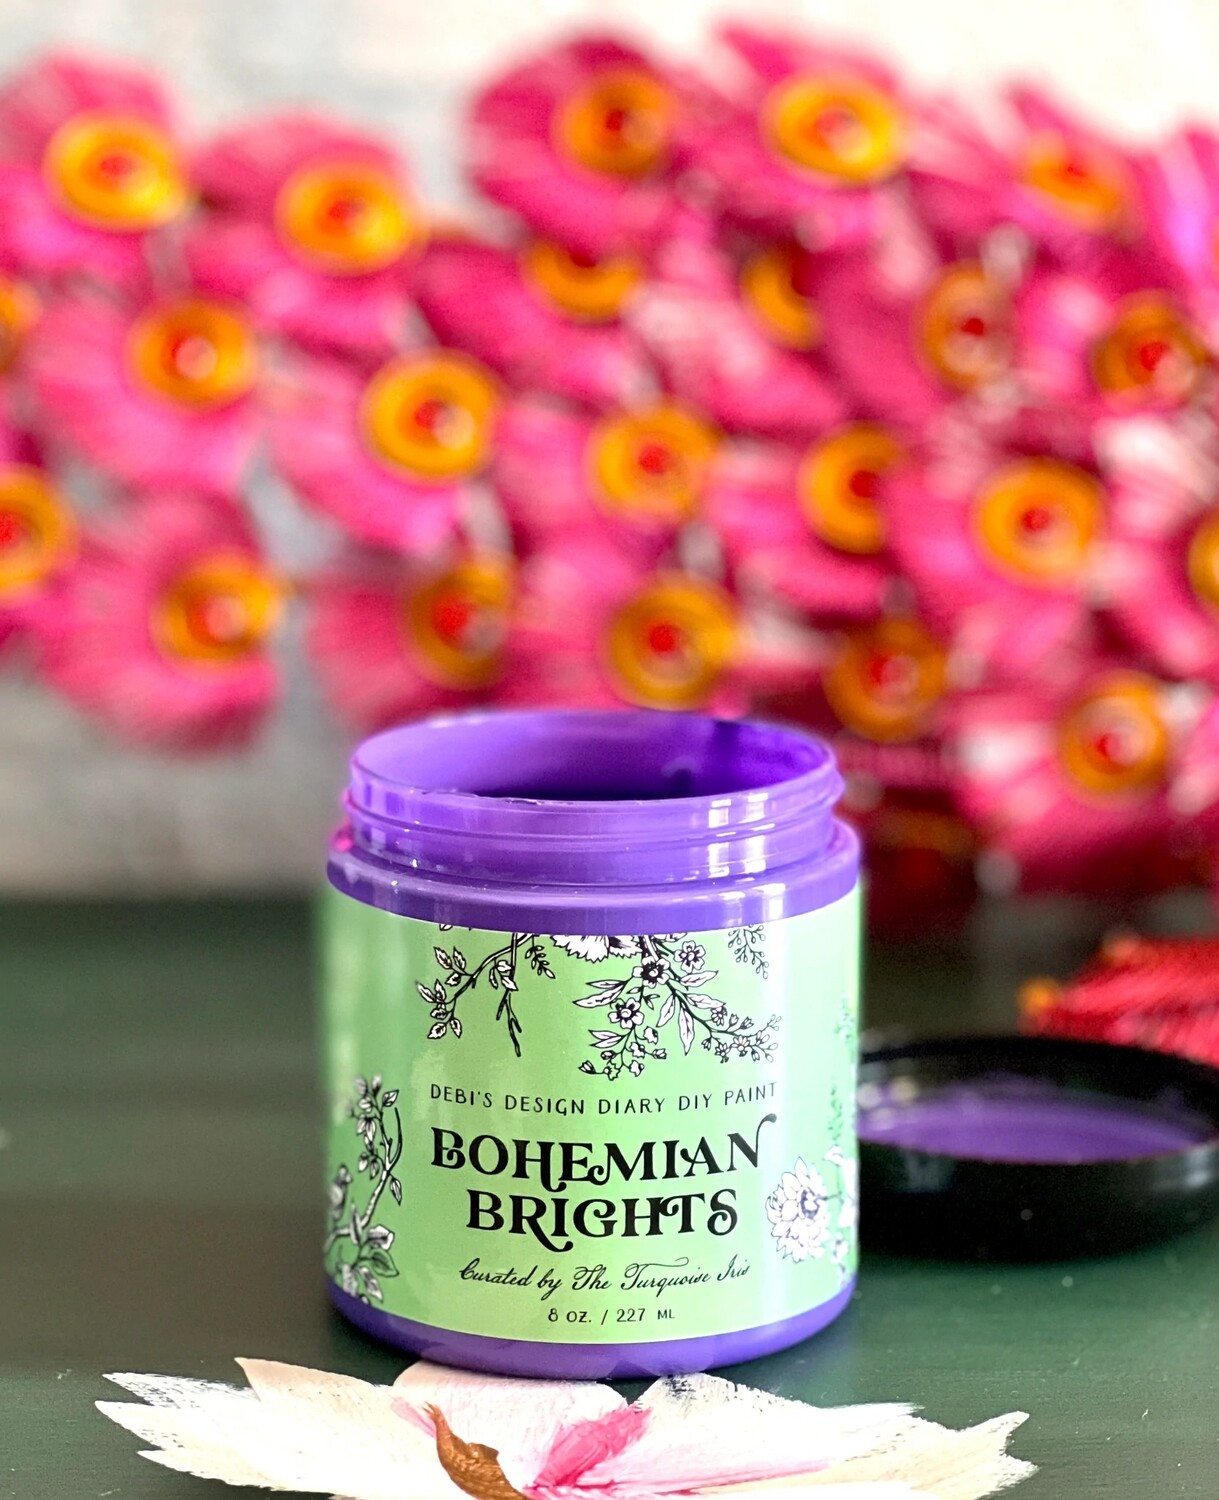 Bohemian Brights Flourished by DIY Paint Co